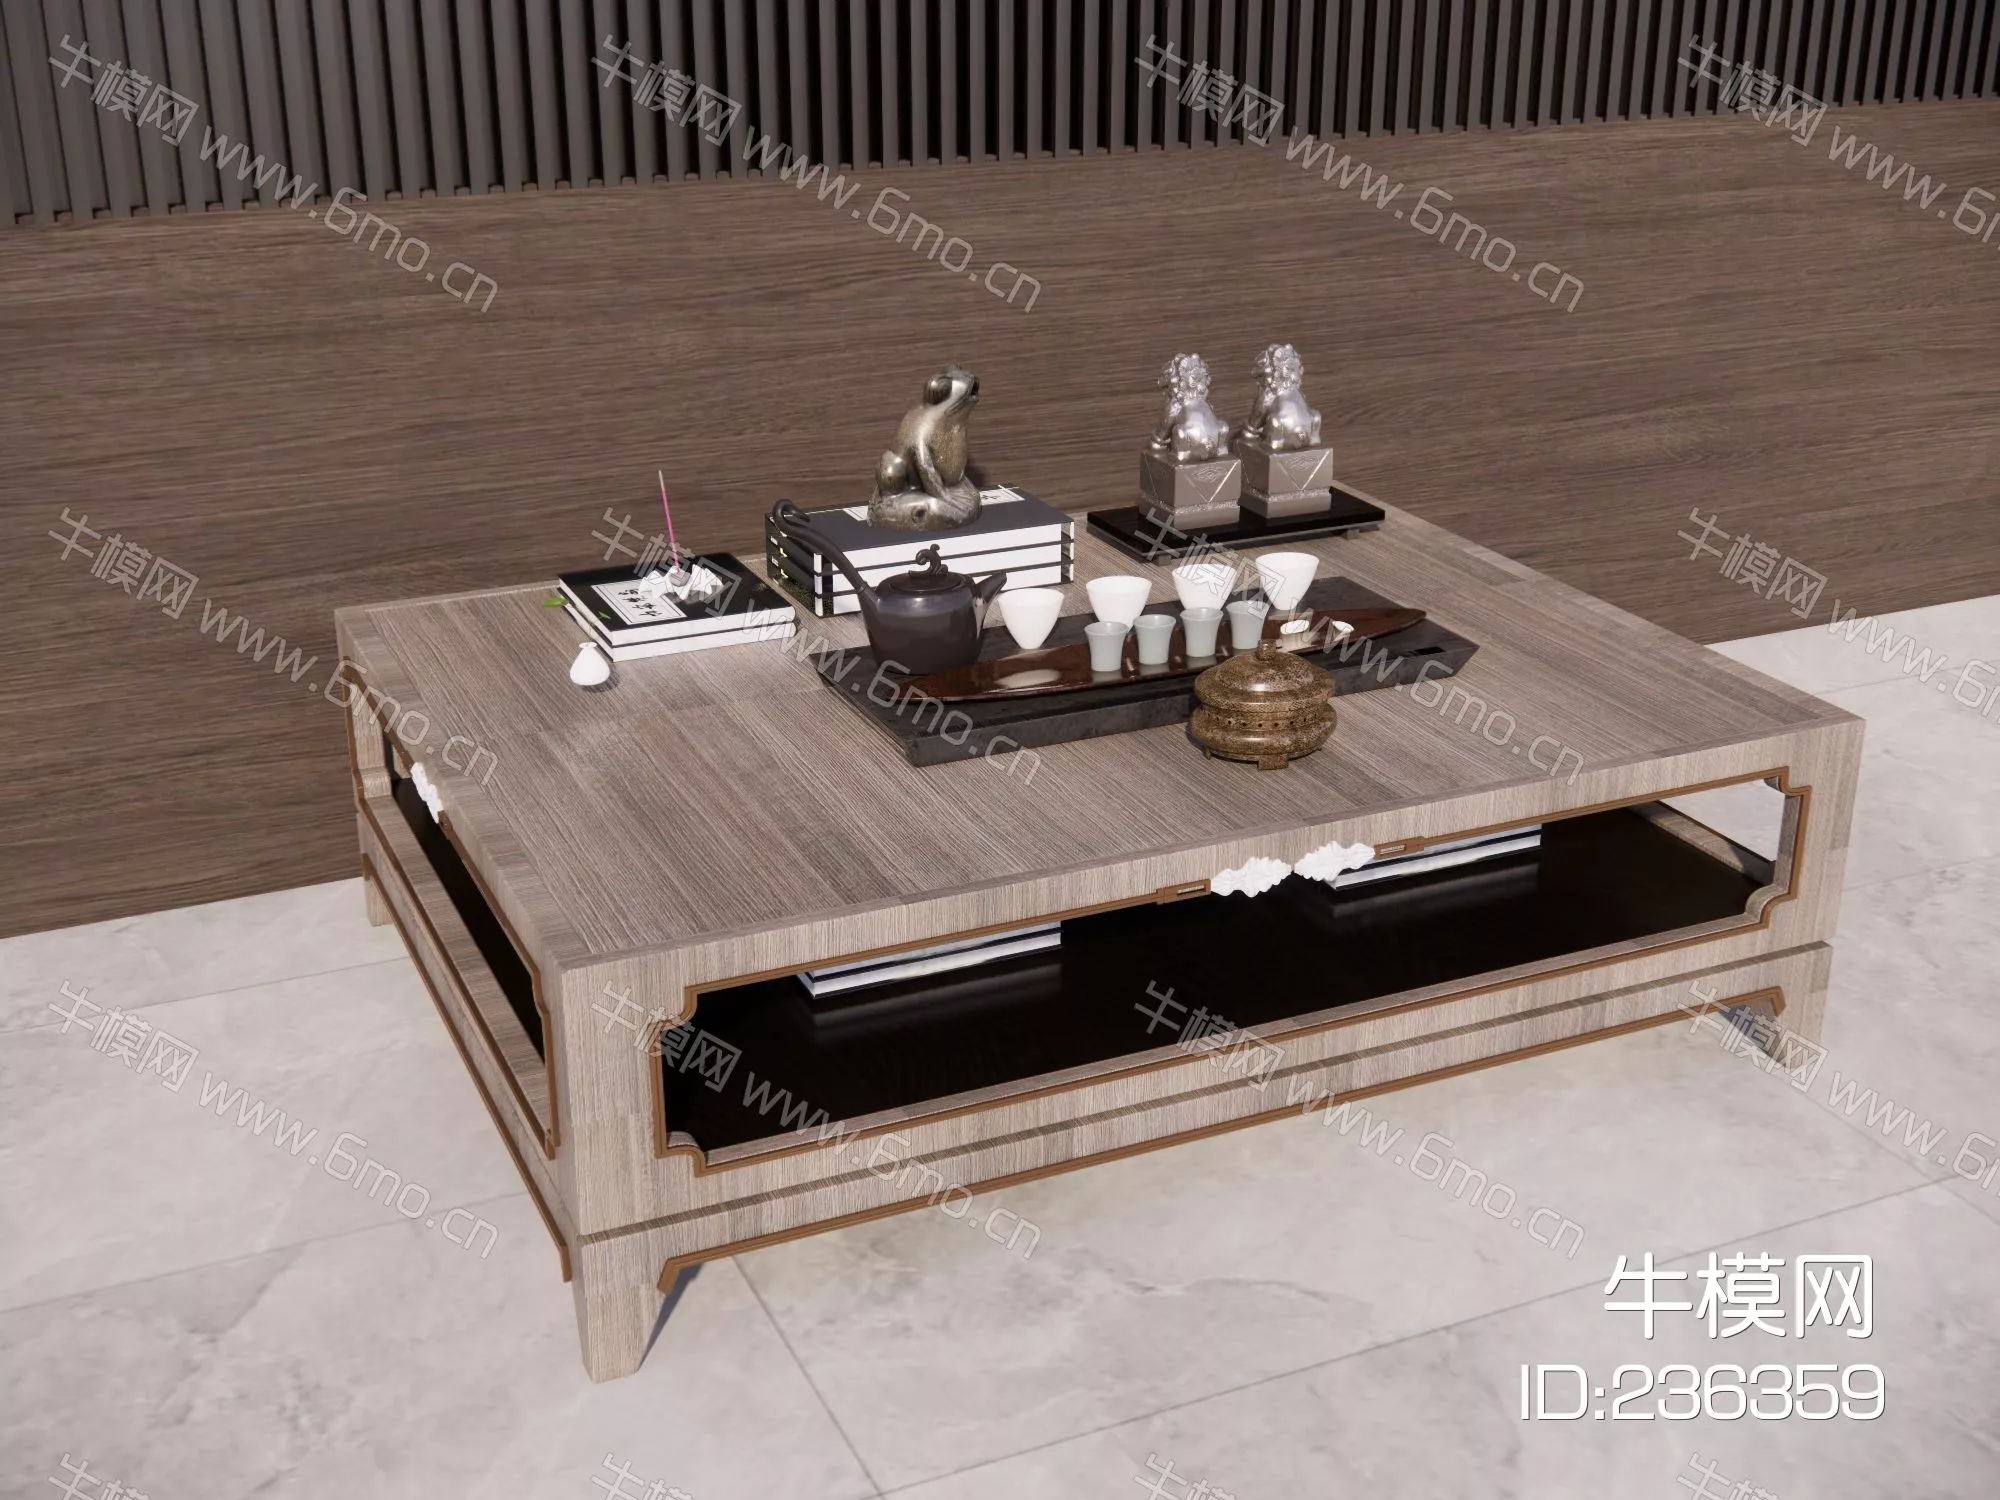 MODERN COFFEE TABLE - SKETCHUP 3D MODEL - ENSCAPE - 236359